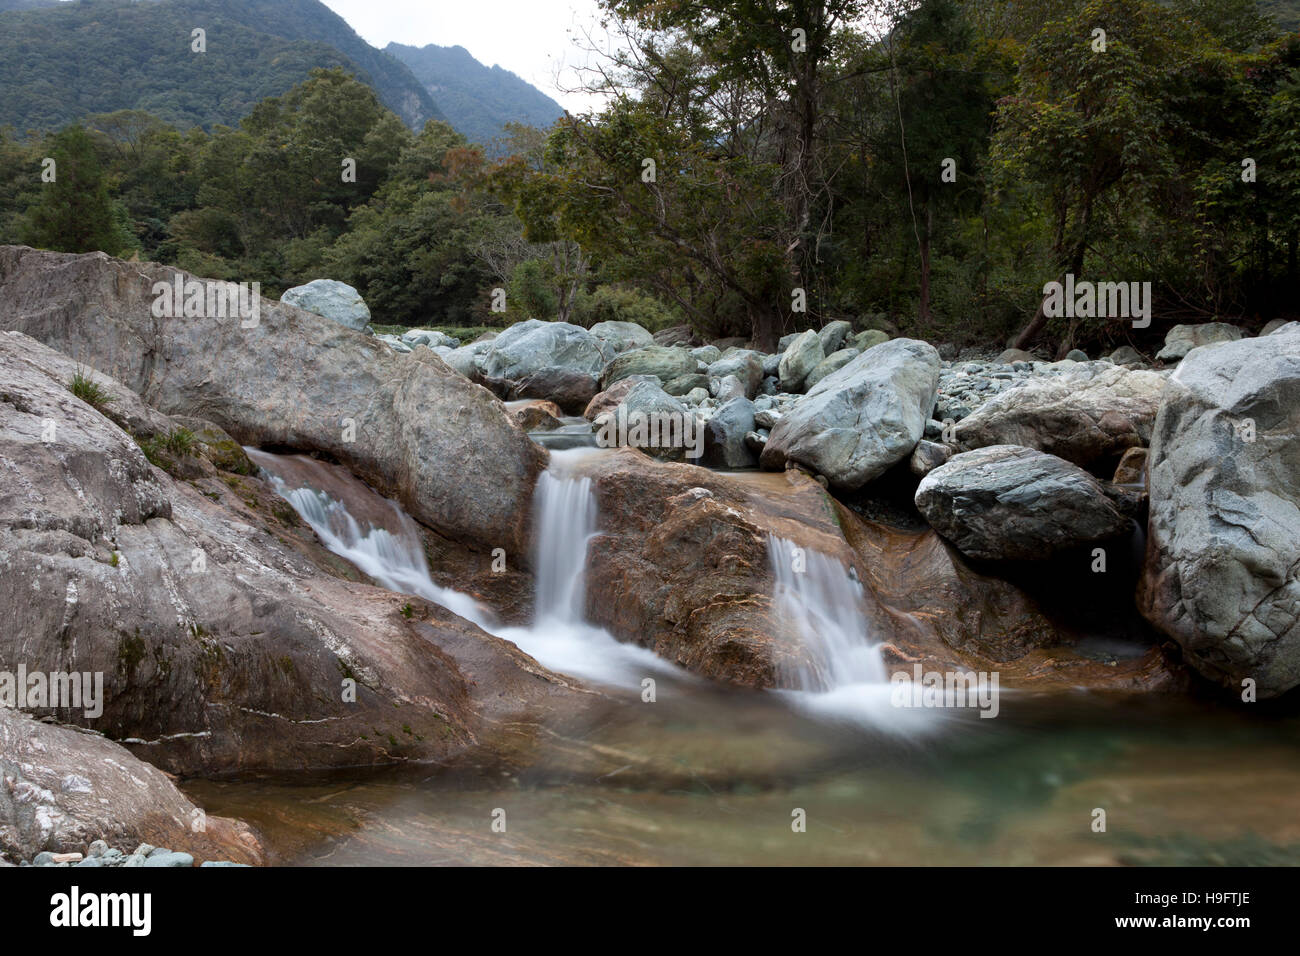 A waterfall on Bai Shui Jiang, a nature reserve in Gansu province in west China. Stock Photo